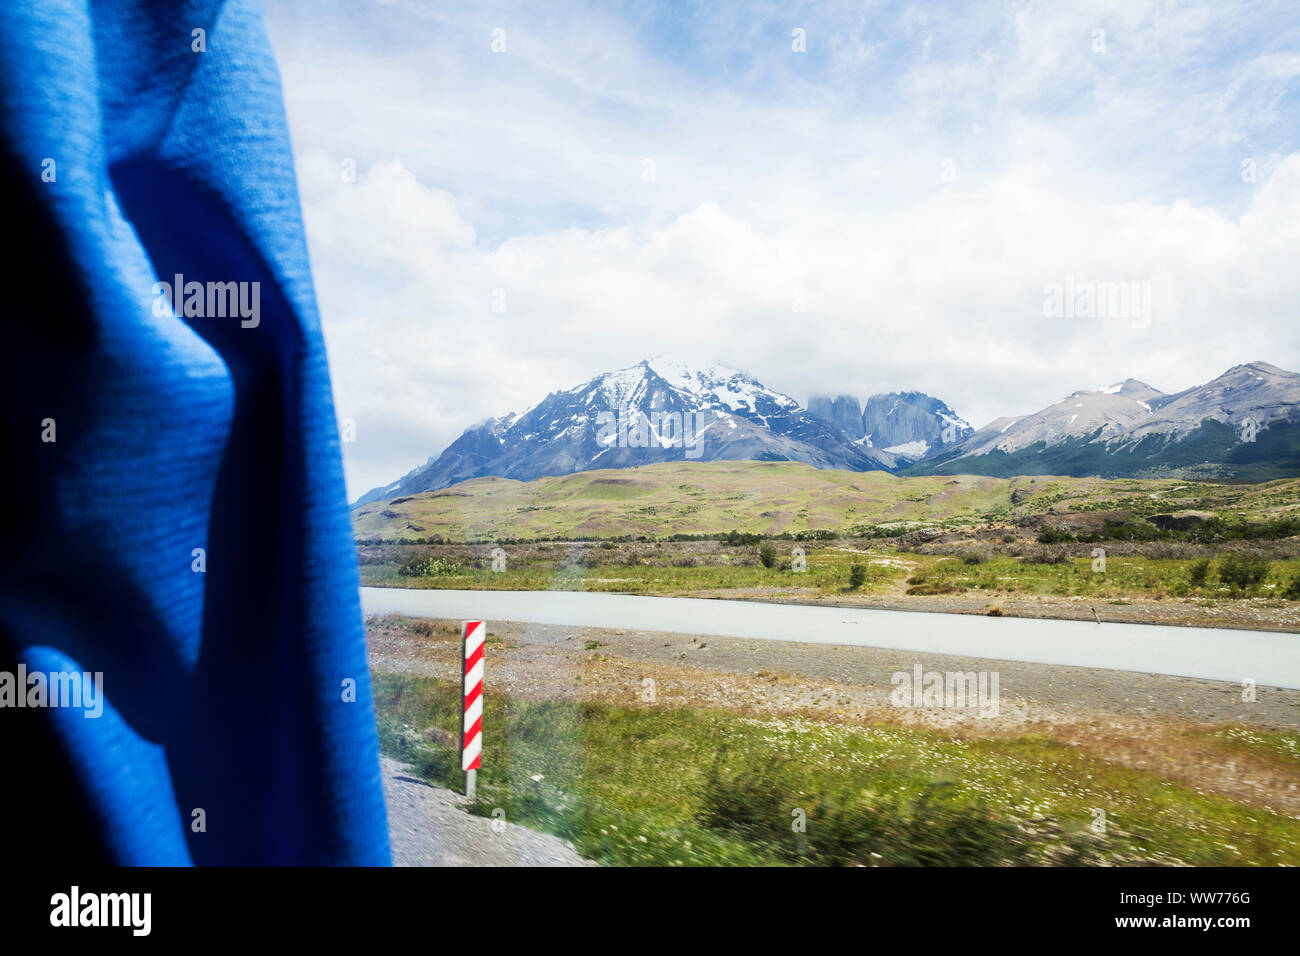 Chile, Patagonia, Torres del Paine National Park Stock Photo